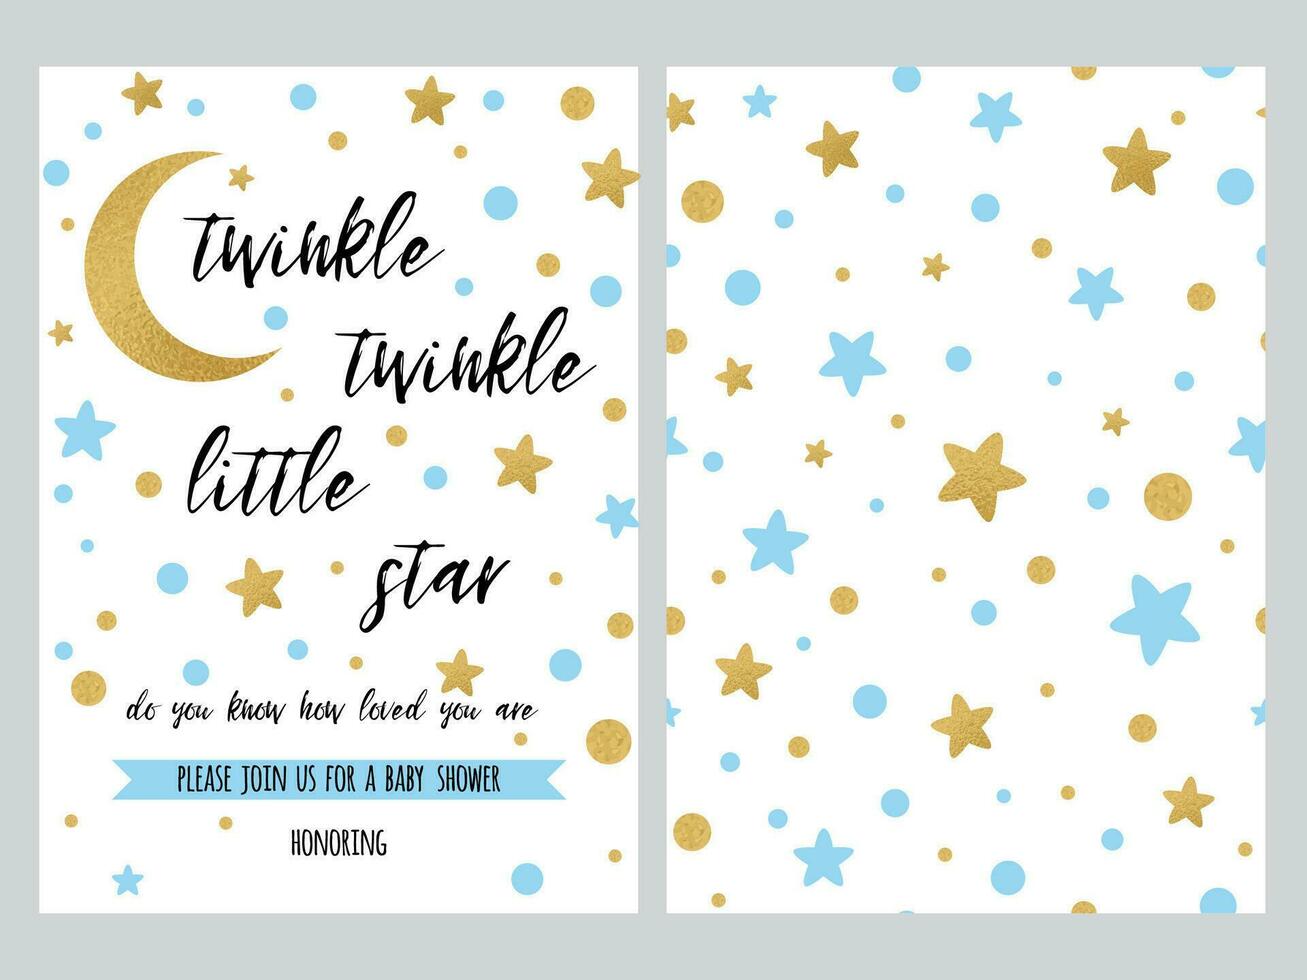 Baby Shower Invitation Template with sparkle gold blue stars, background. Gentle twinkle banner for children birthday party, congratulation, invitation. Vector illustration logo, sign label set